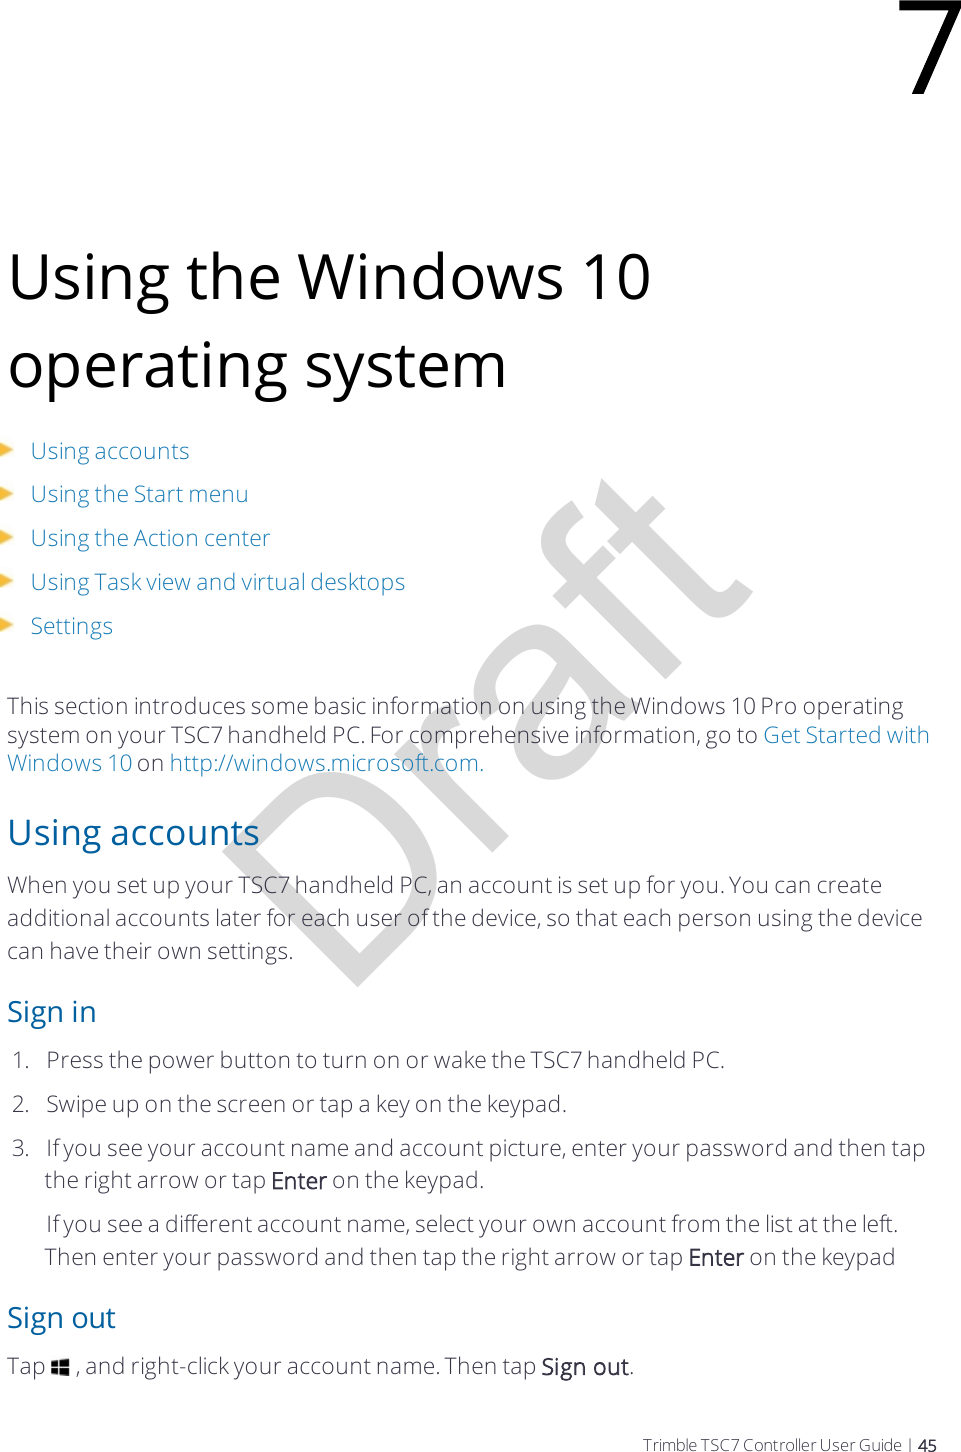 DraftUsing the Windows 10 operating systemUsing accountsUsing the Start menuUsing the Action centerUsing Task view and virtual desktopsSettingsThis section introduces some basic information on using the Windows 10 Pro operating system on your TSC7 handheld PC. For comprehensive information, go to Get Started with Windows 10 on http://windows.microsoft.com.Using accountsWhen you set up your TSC7 handheld PC, an account is set up for you. You can create additional accounts later for each user of the device, so that each person using the device can have their own settings.Sign in1.  Press the power button to turn on or wake the TSC7 handheld PC.2.  Swipe up on the screen or tap a key on the keypad.3.  If you see your account name and account picture, enter your password and then tap the right arrow or tap Enter on the keypad.If you see a different account name, select your own account from the list at the left. Then enter your password and then tap the right arrow or tap Enter on the keypadSign outTap   , and right-click your account name. Then tap Sign out.7Trimble TSC7 Controller User Guide | 45